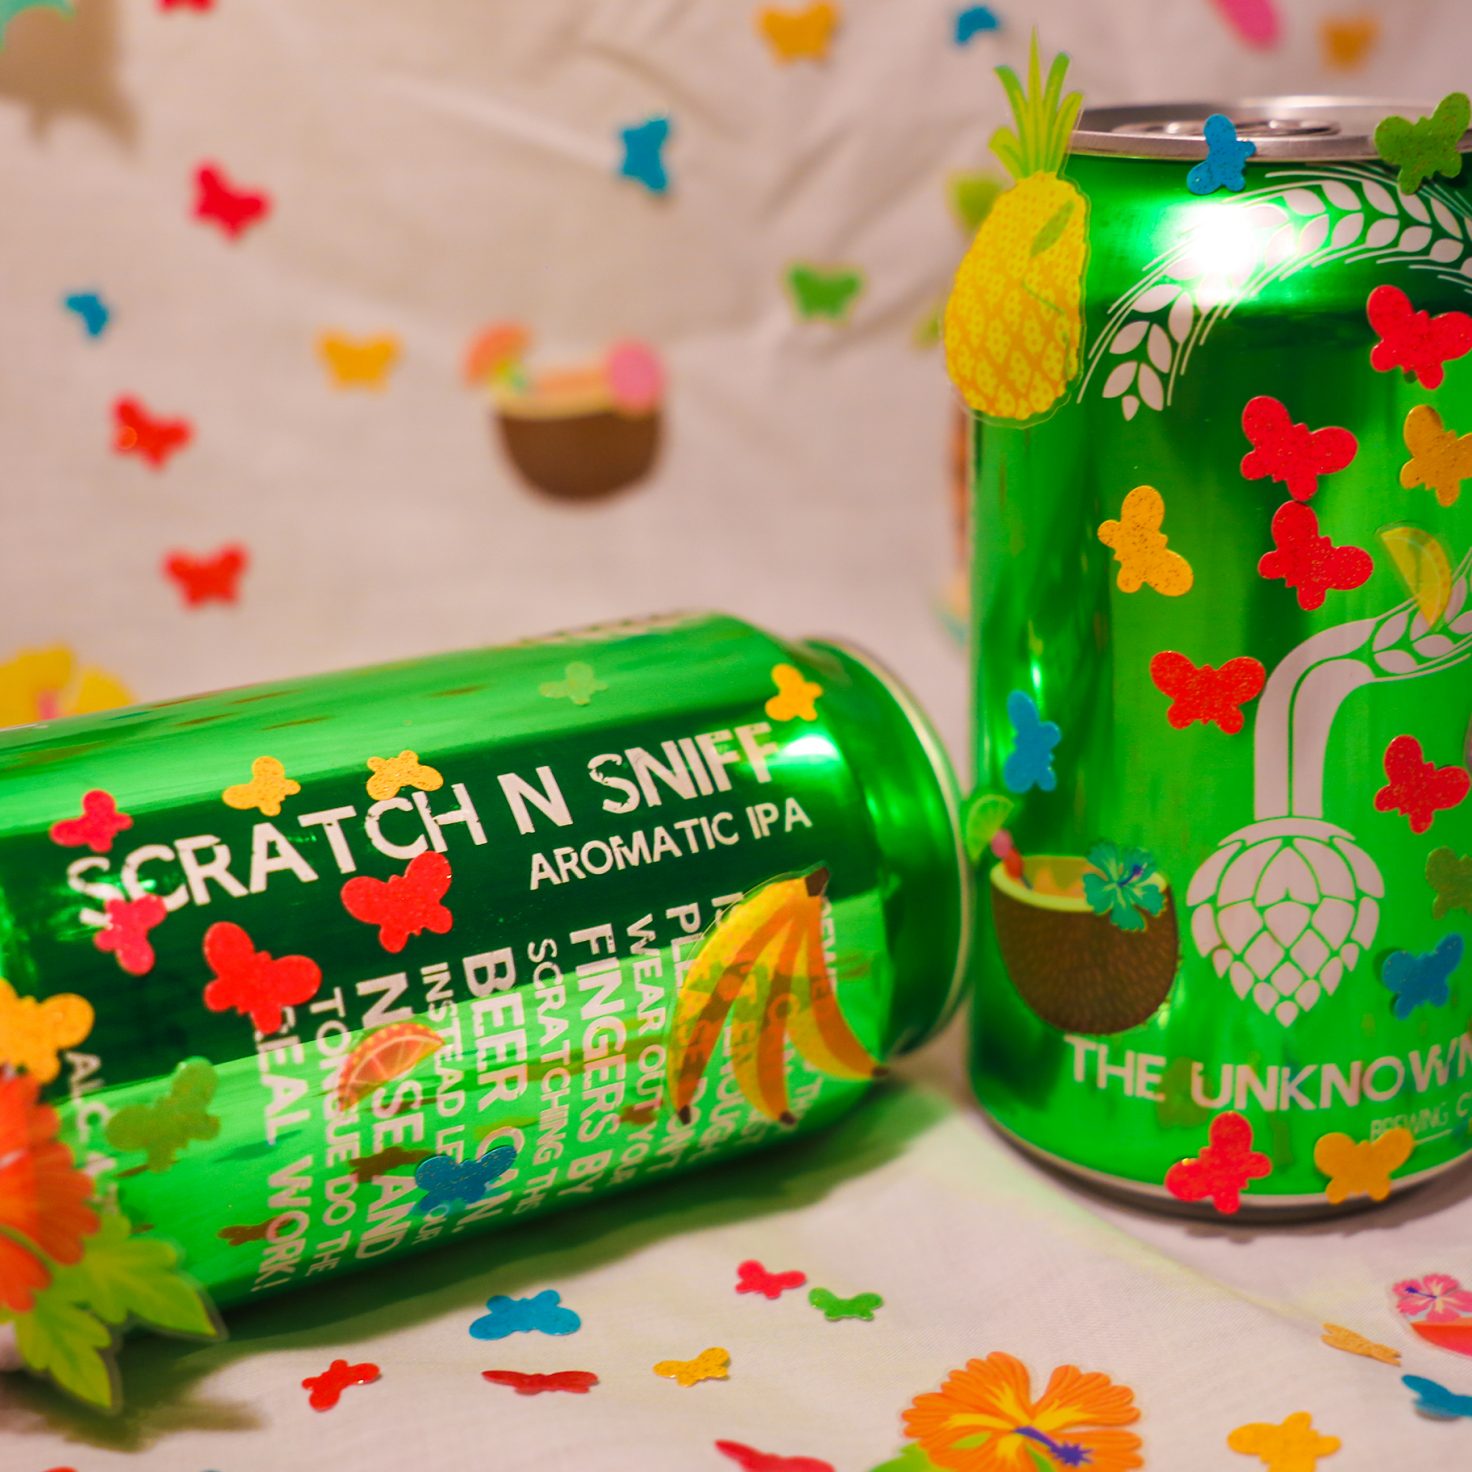 Unknown Brewing Scratch n Sniff can